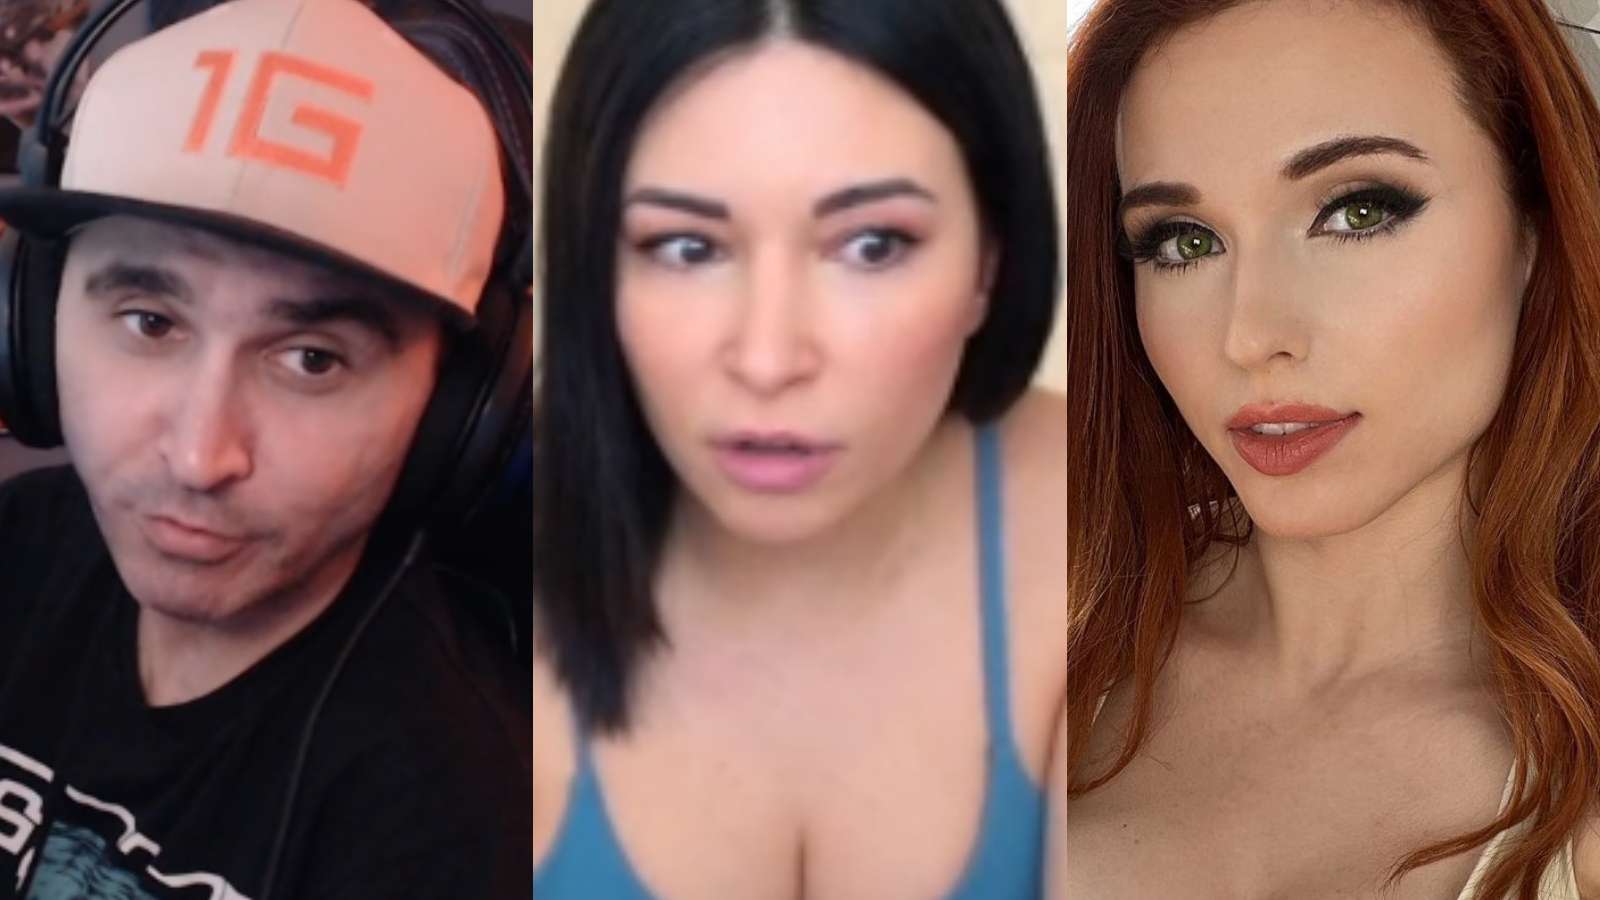 alinity with summit1g and amouranth on twitch